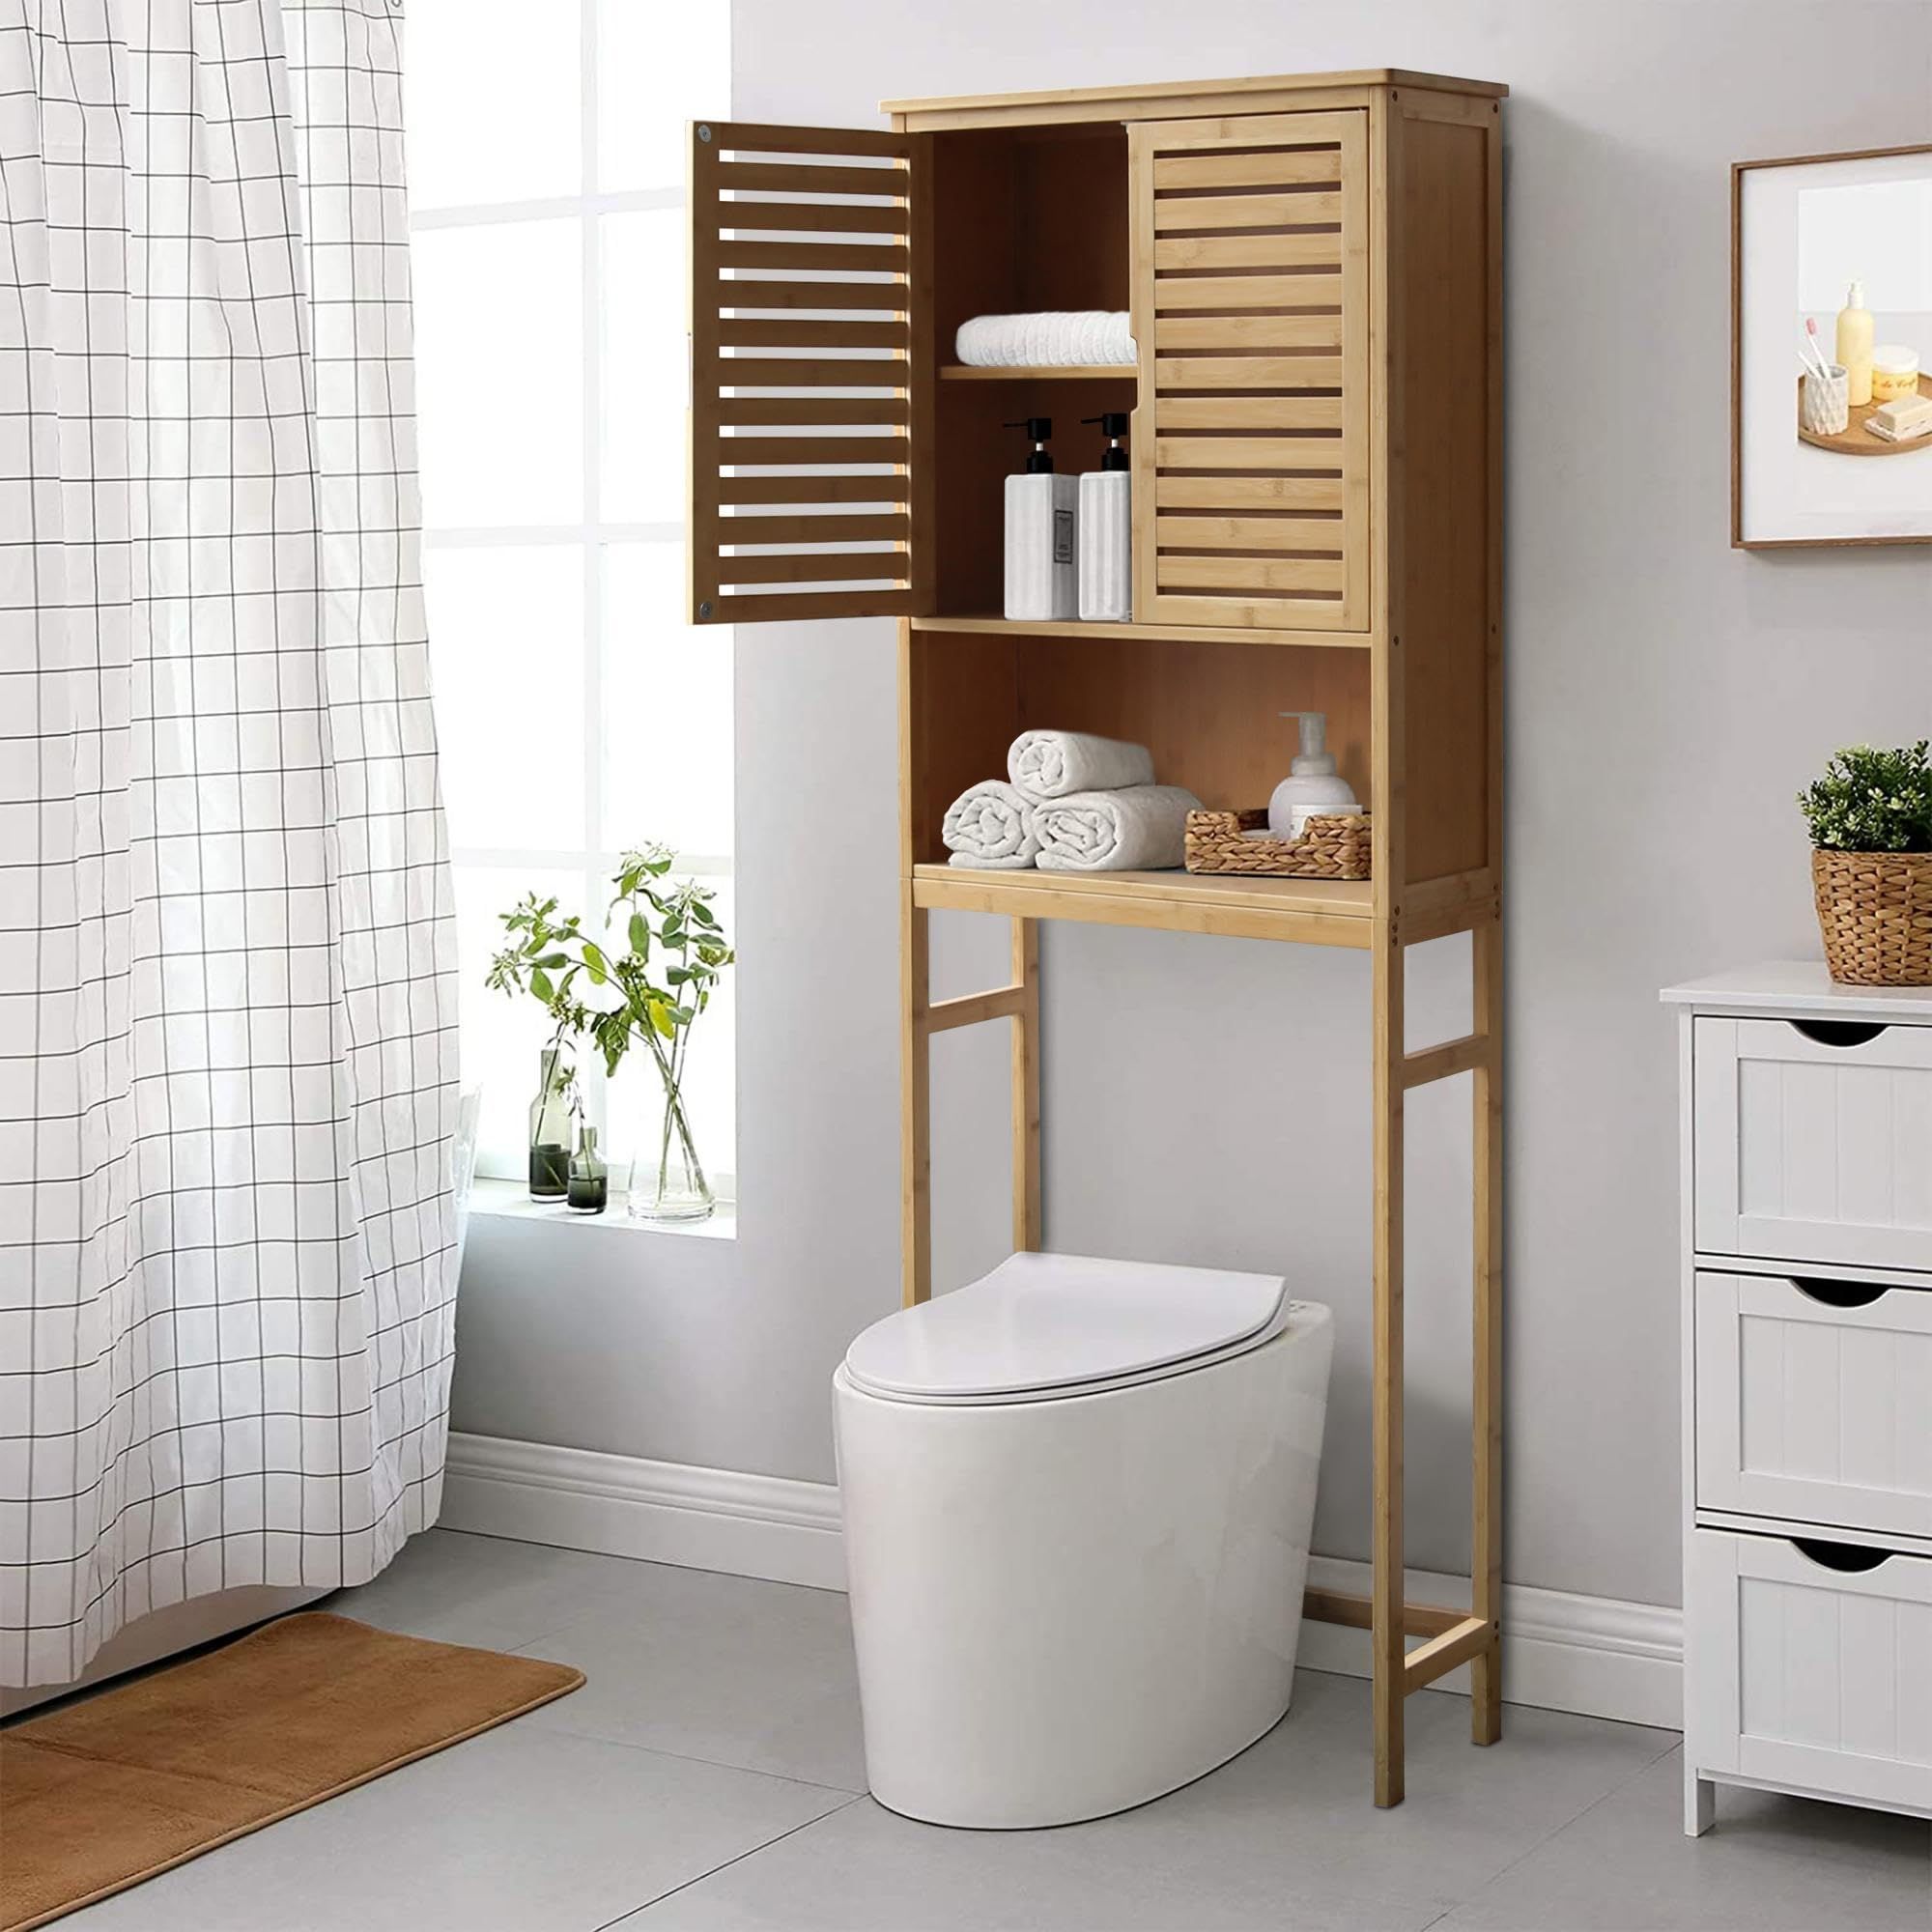 Maximize Your Bathroom Space with an Over Toilet Storage Solution